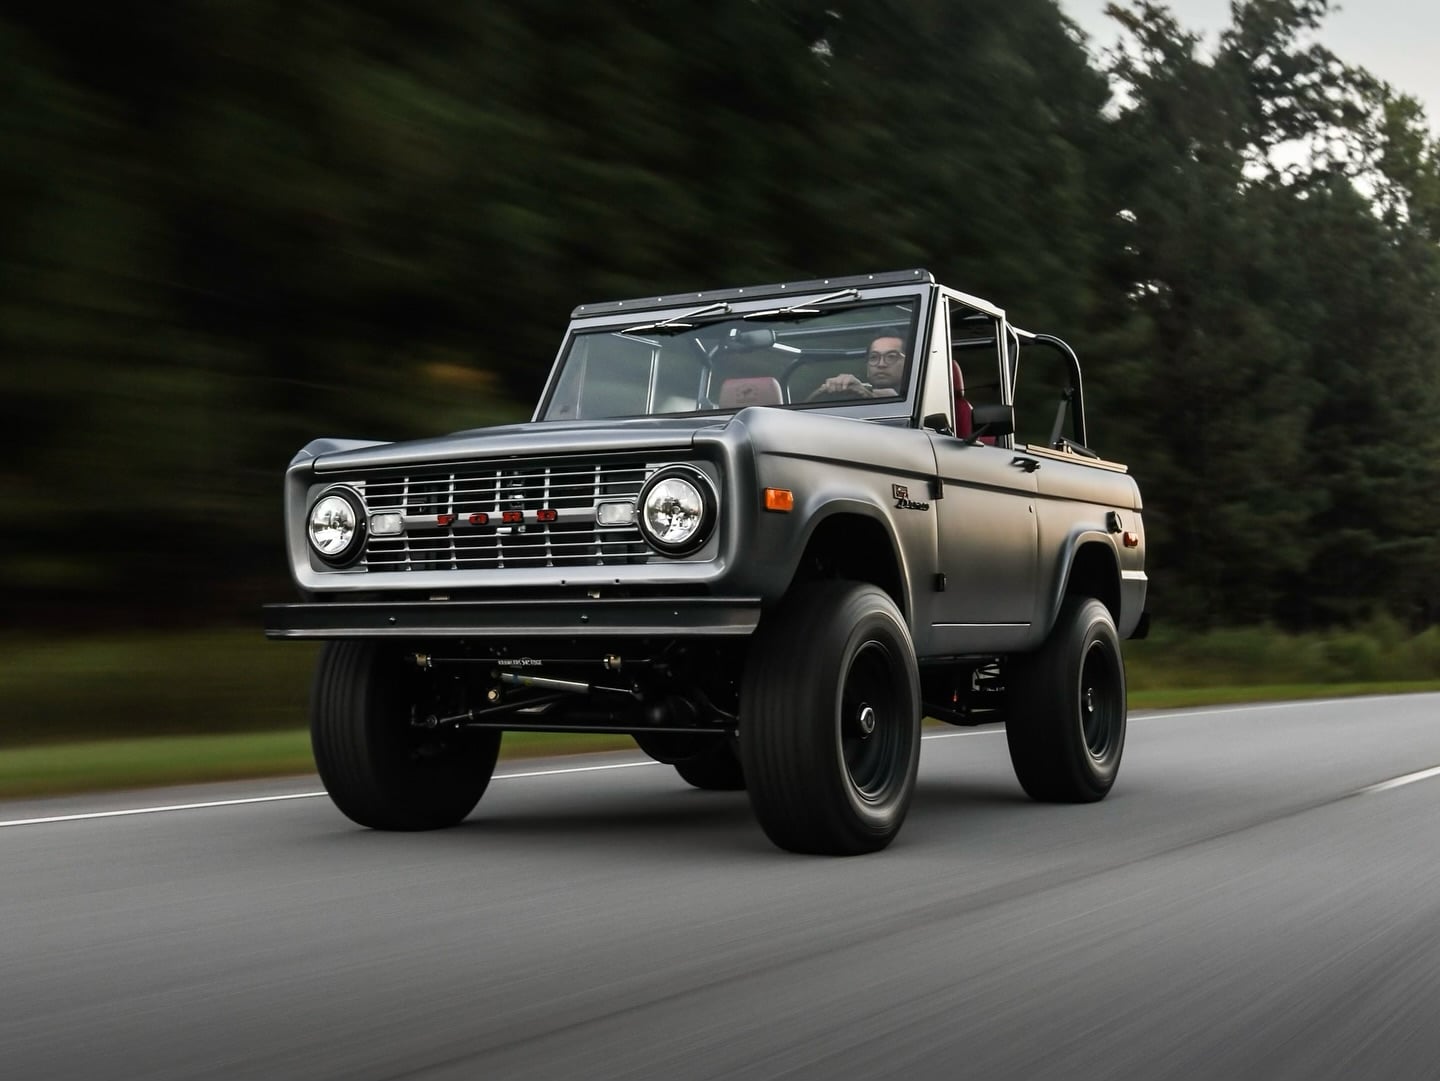 Driving a Vintage Ford Bronco with a Coyote Engine Swap